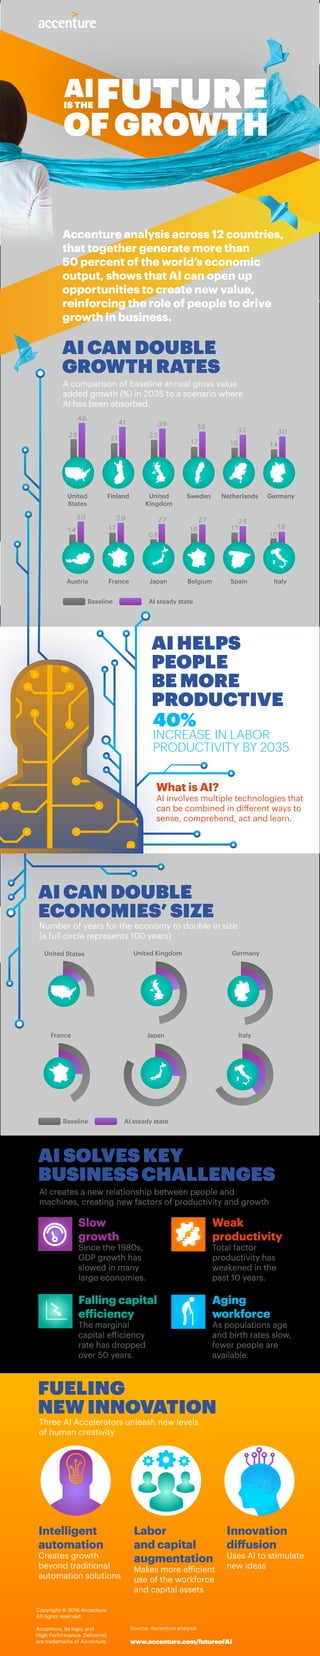 Accenture analysis across 12 countries,
that together generate more than
50 percent of the world’s economic
output, shows that AI can open up
opportunities to create new value,
reinforcing the role of people to drive
growth in business.
40%
INCREASE IN LABOR
PRODUCTIVITY BY 2035
AI CAN DOUBLE
GROWTH RATES
AI HELPS
PEOPLE
BE MORE
PRODUCTIVE
A comparison of baseline annual gross value
added growth (%) in 2035 to a scenario where
AI has been absorbed.
Number of years for the economy to double in size
(a full circle represents 100 years)
AI establishes a new relationship between people and
machines, creating new factors of productivity and growth
AI SOLVES KEY BUSINESS
CHALLENGES
AI CAN DOUBLE
ECONOMIES’ SIZE
What is AI?
AI involves multiple technologies that
can be combined in different ways to
sense, comprehend, act and learn.
Slow
growth
Since the 1980s,
GDP growth has
slowed in many
large economies.
Weak
productivity
Total factor
productivity has
weakened in the
past 10 years.
Falling capital
efficiency
The marginal
capital efficiency
rate has dropped
over 50 years.
Intelligent
automation
Creates growth
beyond traditional
automation solutions
Copyright © 2016 Accenture
All rights reserved.
Accenture, its logo, and
High Performance. Delivered.
are trademarks of Accenture.
Source: Accenture analysis
www.accenture.com/futureofAI
Labor
and capital
augmentation
Makes more efficient
use of the workforce
and capital assets
Innovation
diffusion
Uses AI to stimulate
new ideas
Aging
workforce
As populations age
and birth rates slow,
fewer people are
available.
Three AI accelerators unleash new levels
of human creativity
FUELING
INNOVATION
0.8
1.7
1.4
1.6
1.7
2.5
2.1
4.6
4.1
2.6
3.2
3.0 3.0 2.9
2.7 2.7
2.5
1.0
3.9
3.6
1.6 1.7
1.8
1.4
BASELINE
SPAIN ITALYBELGIUMJAPANAUSTRIAGERMANYNETHERLANDSSWEDENUNITED
KINGDOM
FINLANDUNITED
STATES
FRANCE
AI STEADY STATE
Baseline AI steady state
GermanyUnited States
France Japan Italy
United Kingdom
 